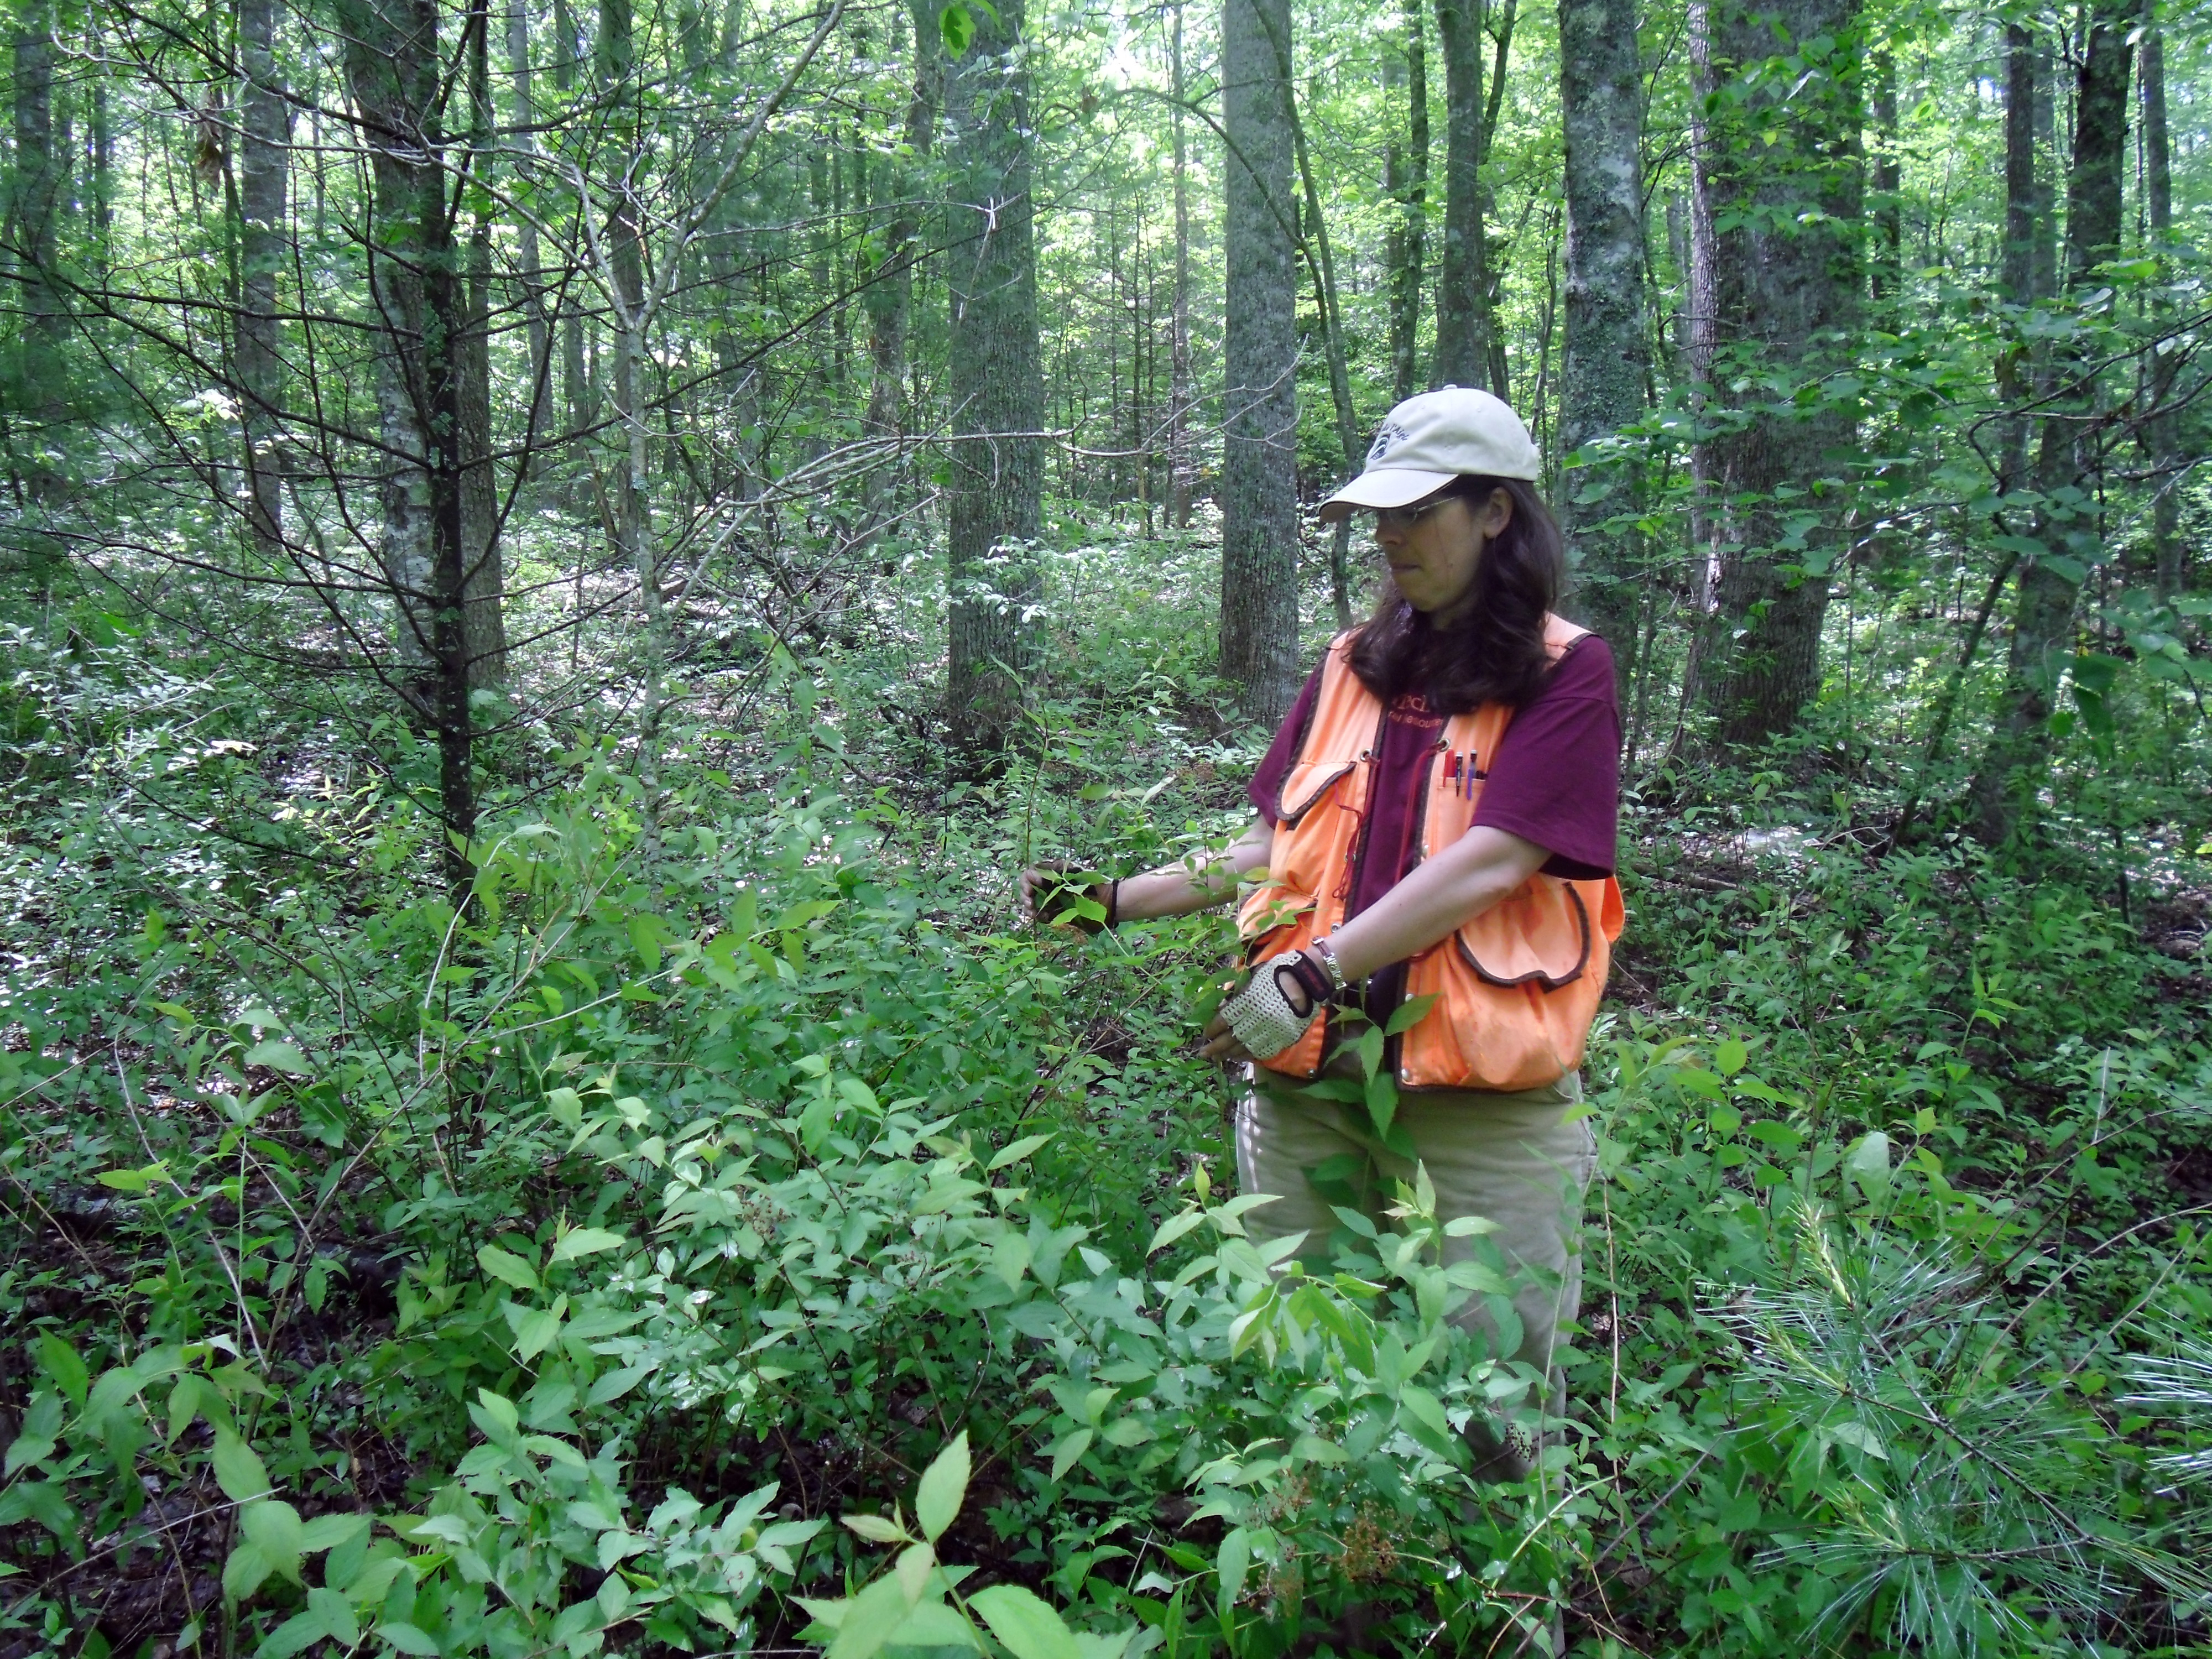 Carolyn Copenheaver standing in front of a shrub in a forest